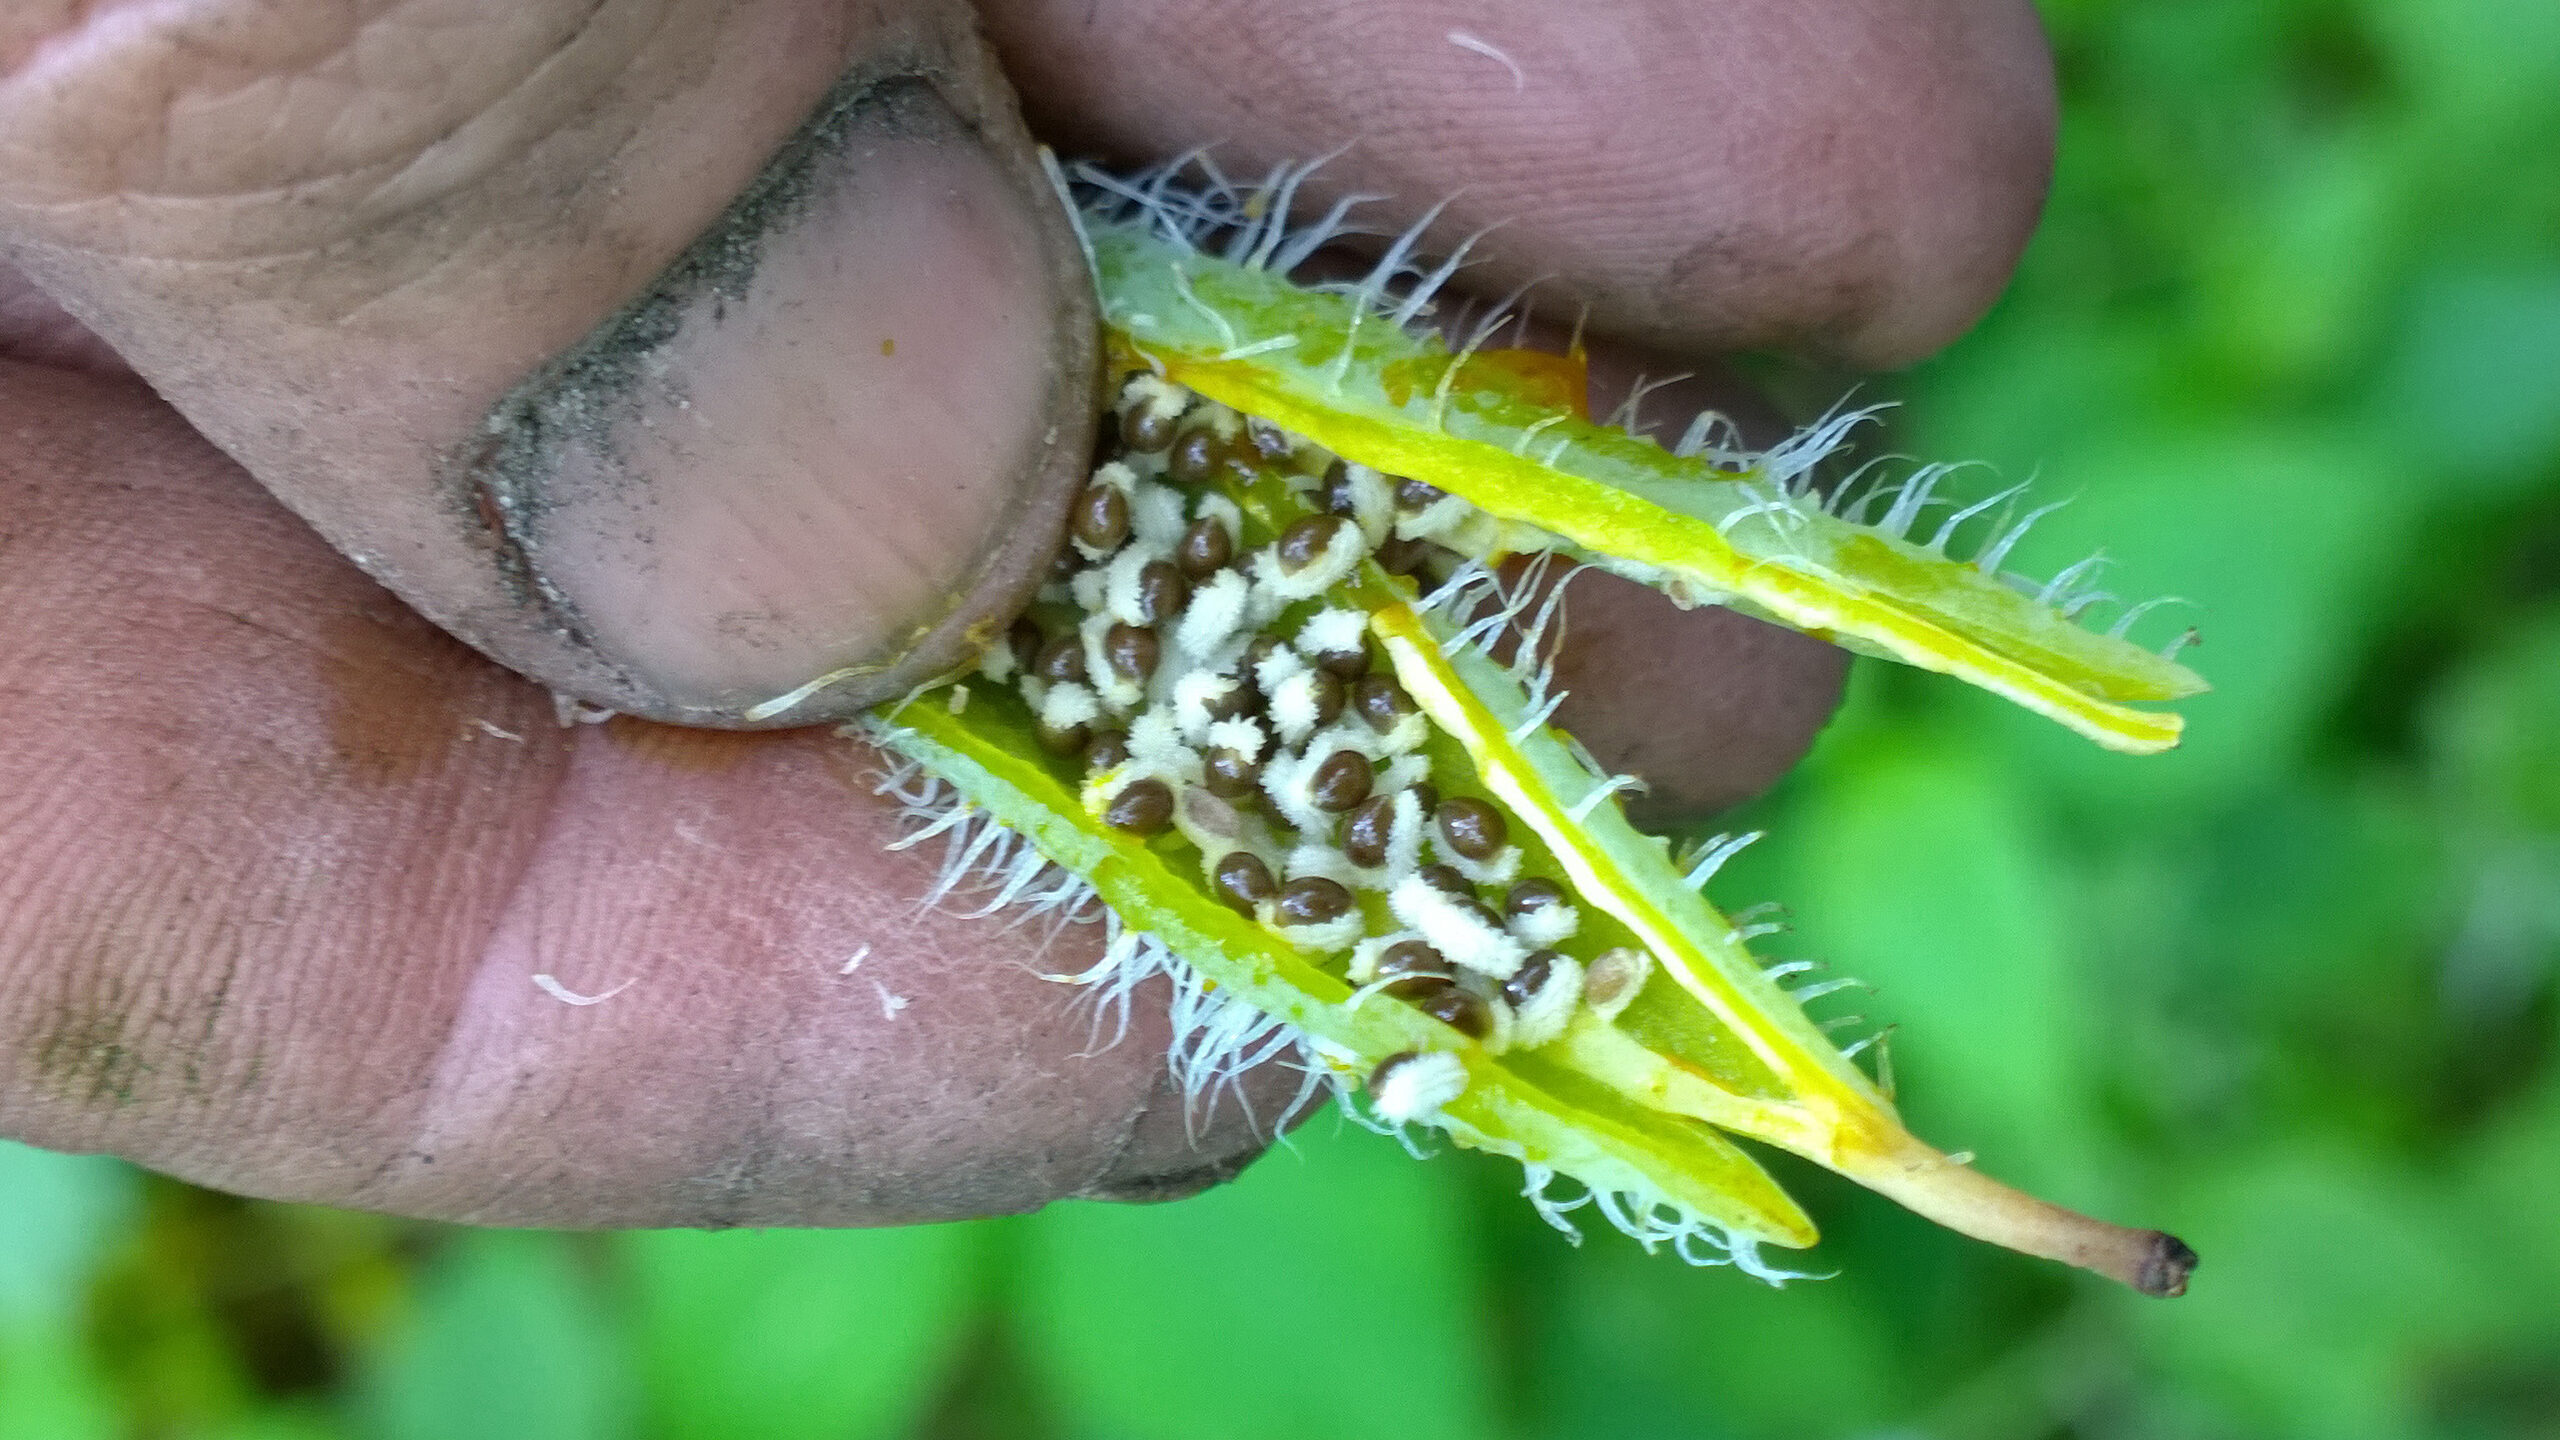 Photo shows a gardener's hand holding a celandine poppy seed pod that is open and bearing seeds